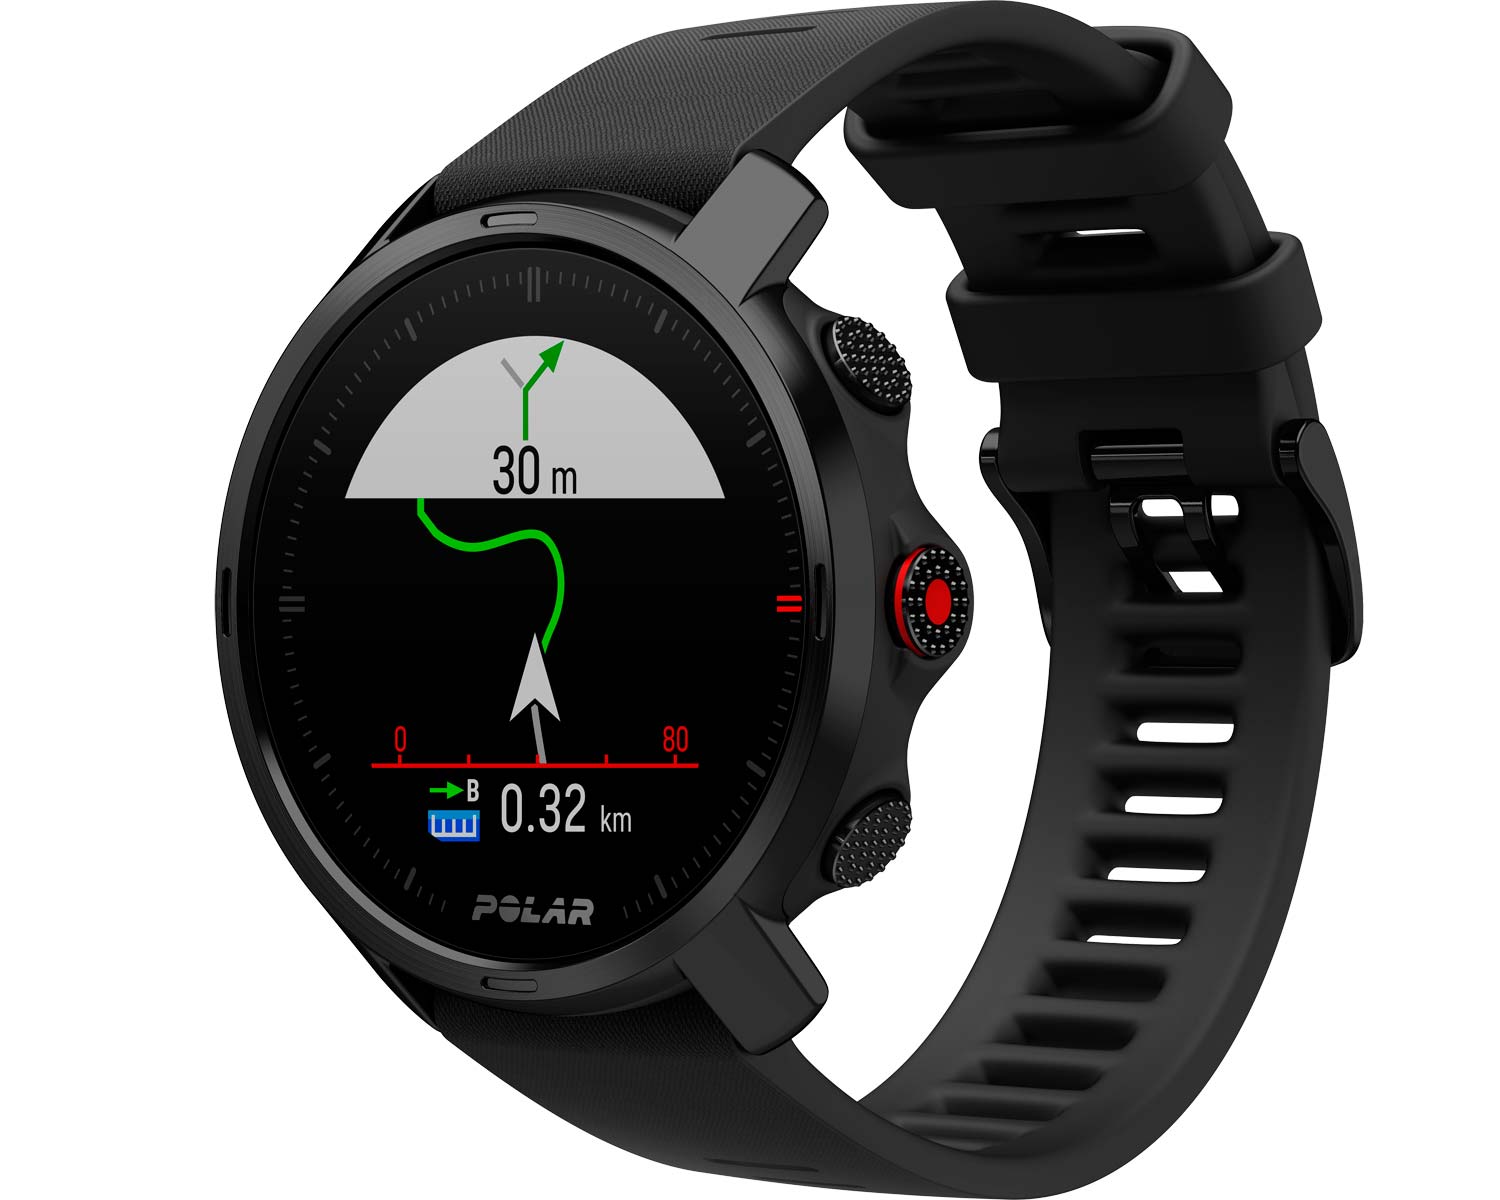 Polar Grit X GPS smartwatch, wrist-based heart rate GPS tracking training smart watch cycle computer for cyclists runners komoot